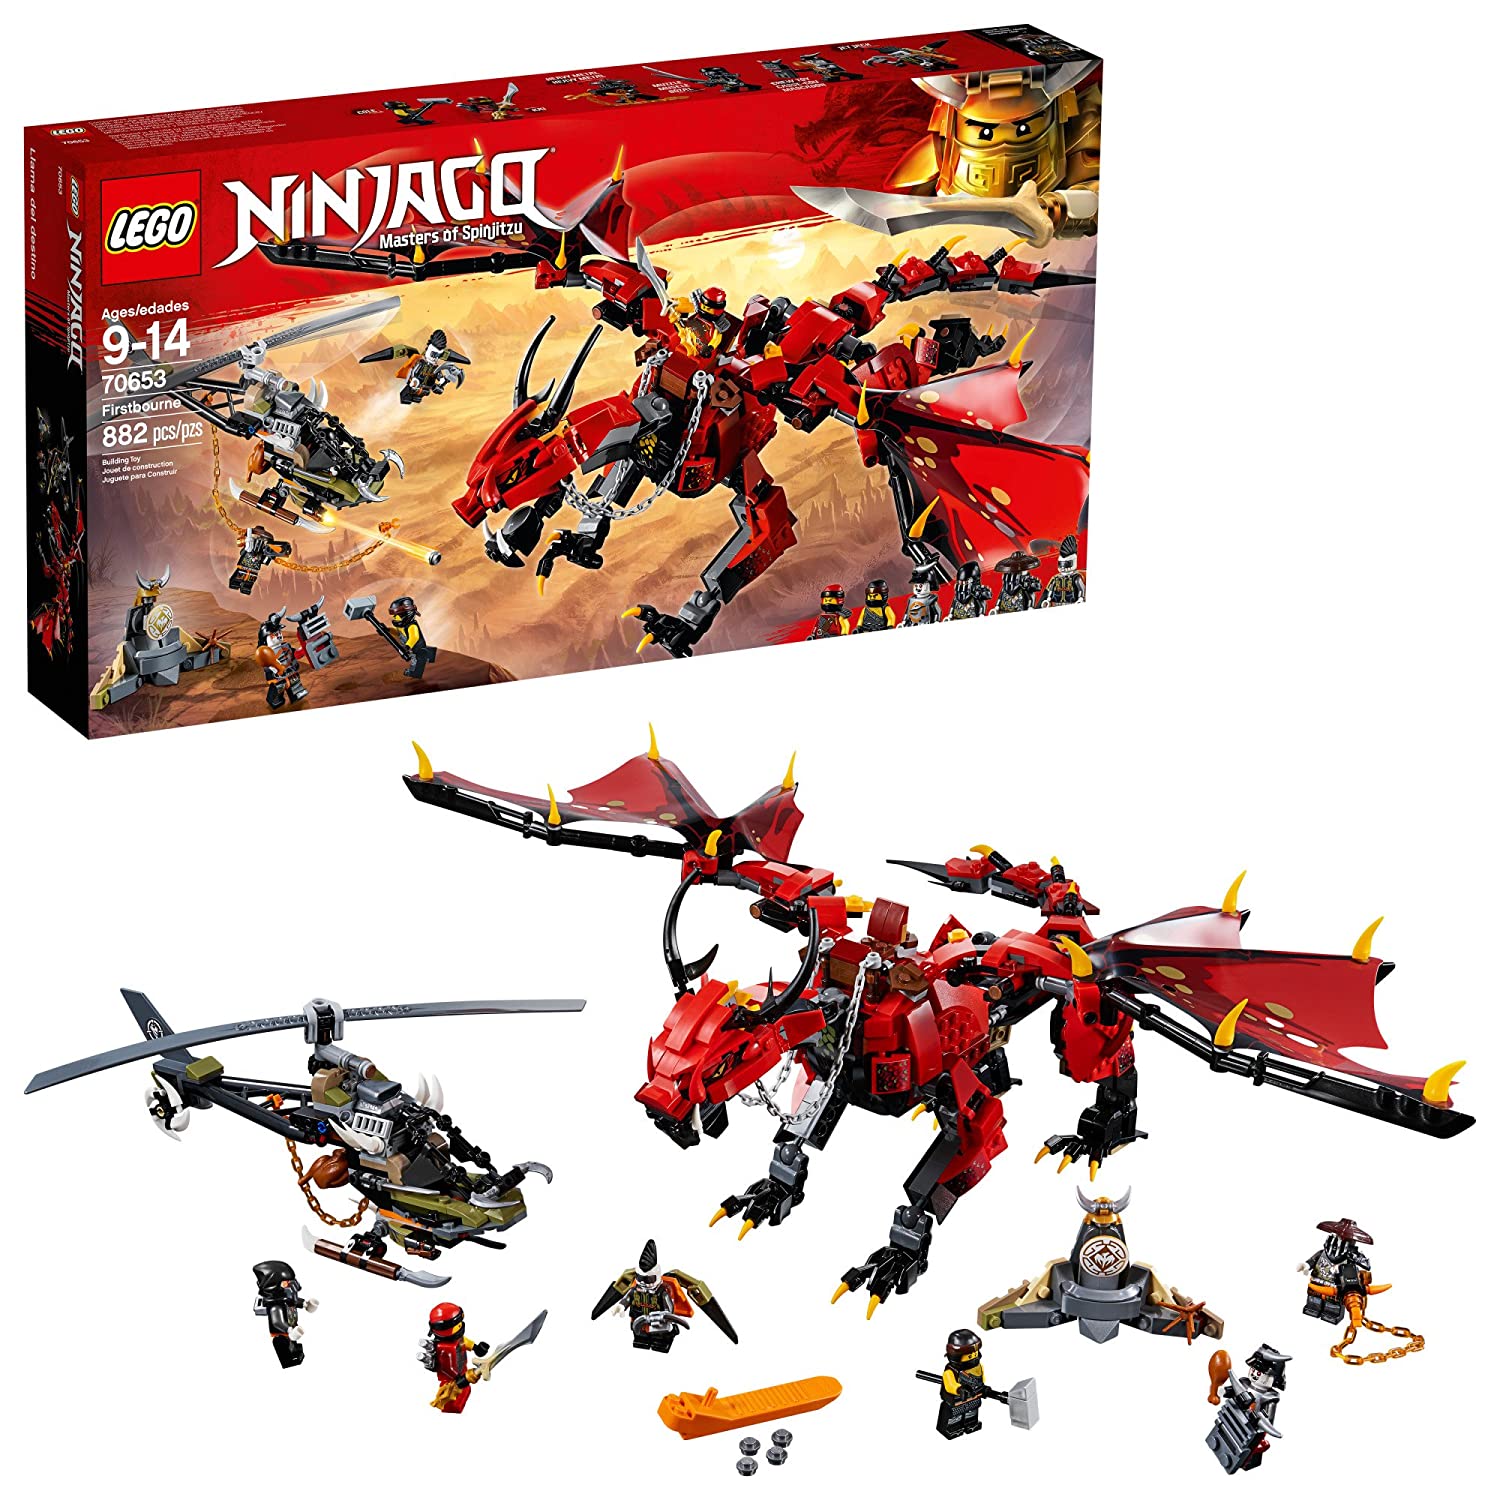 LEGO NINJAGO Masters of Spinjitzu: Firstbourne 70653 Ninja Toy Building Kit with Red Dragon Figure, Minifigures and a Helicopter (882 Pieces)